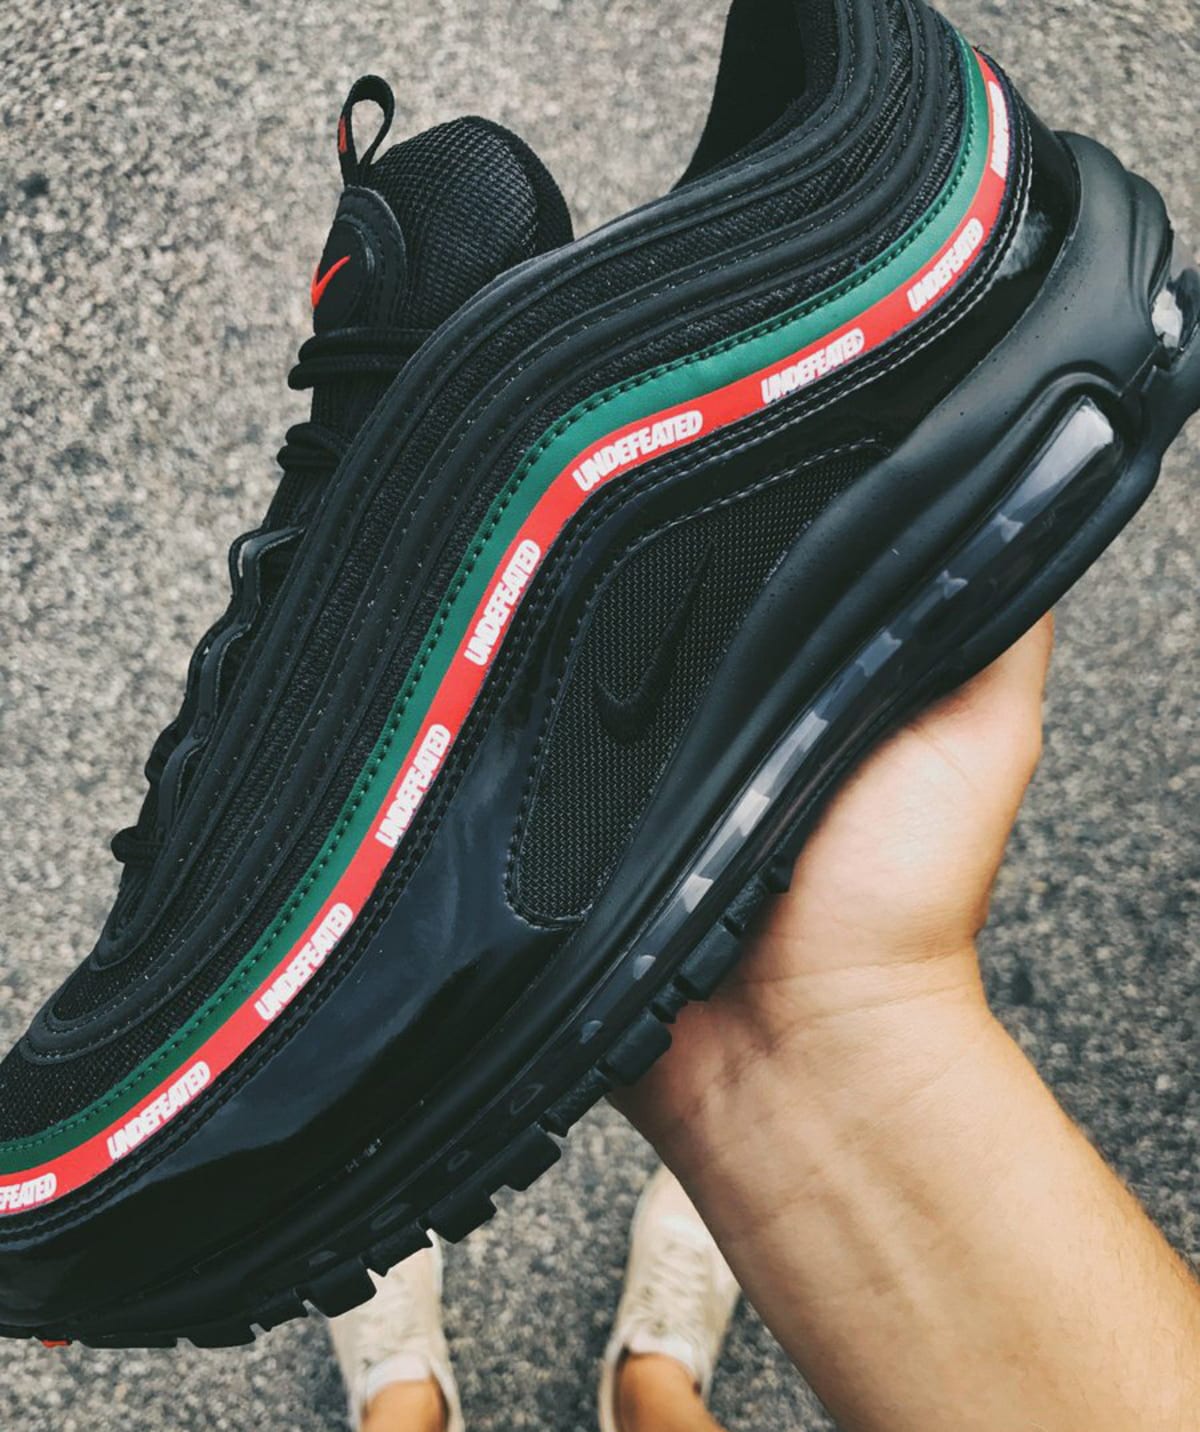 undefeated air max 97 on feet